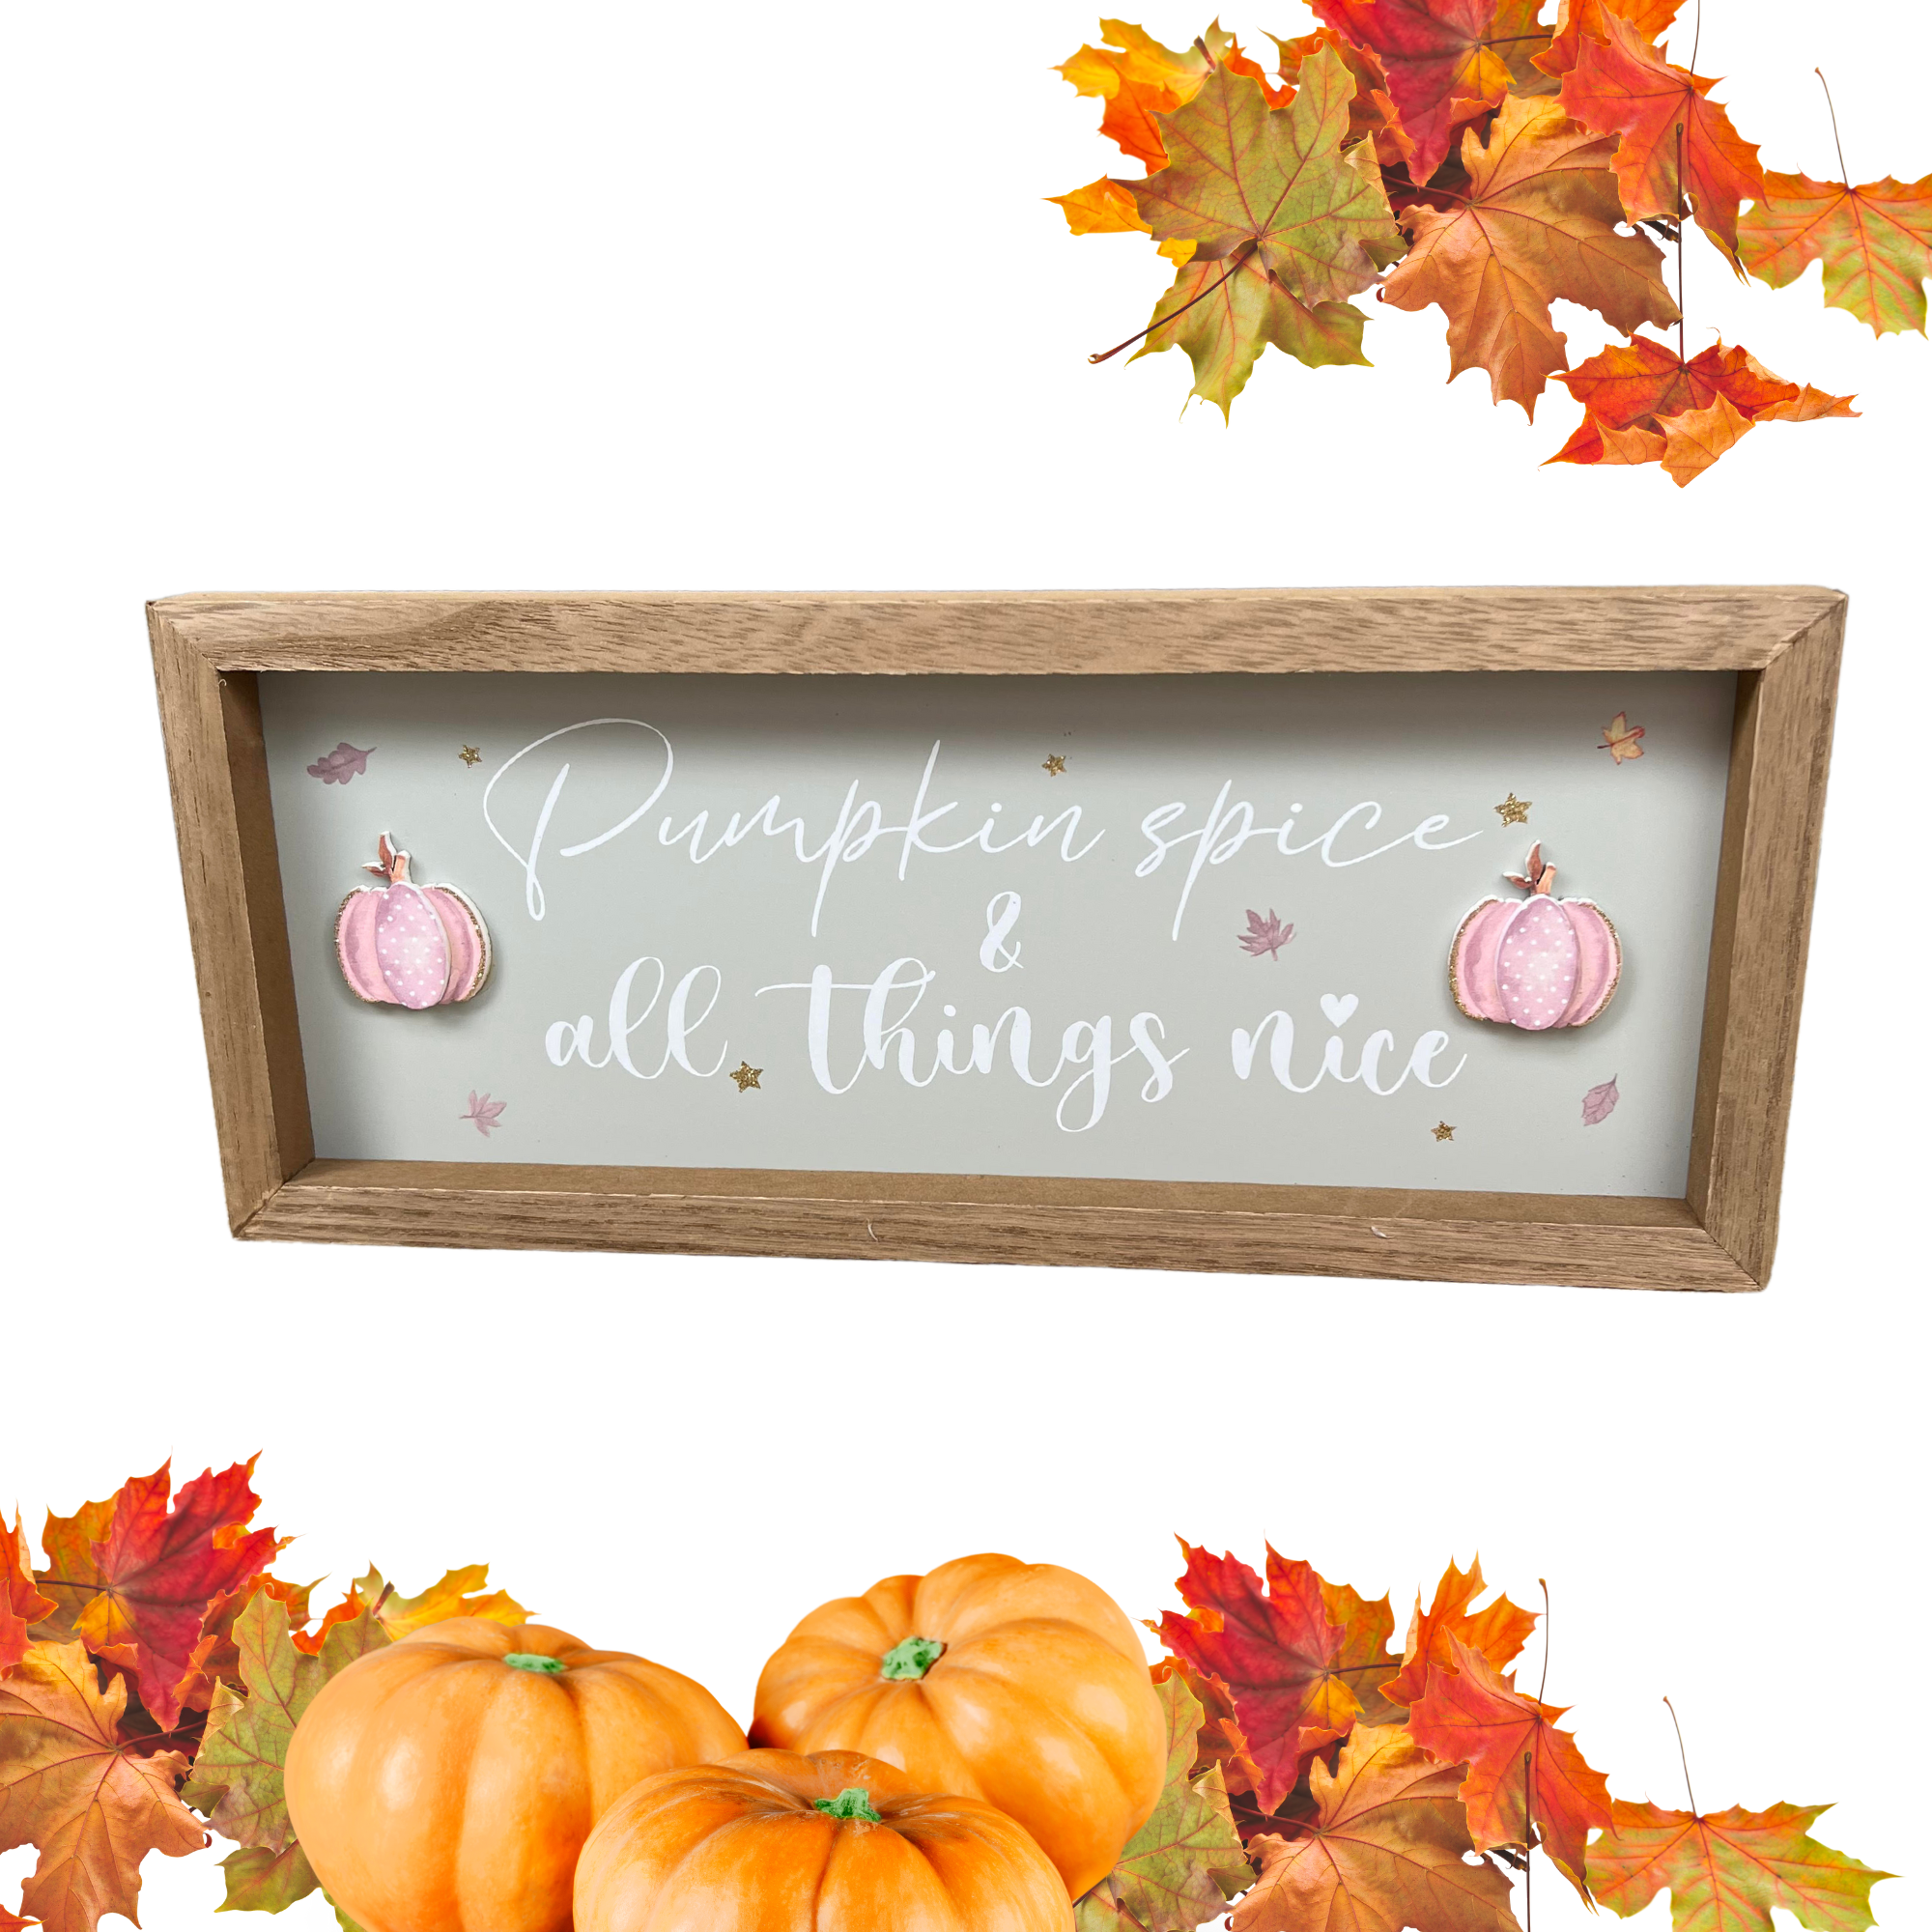 Pumpkin Spice & All Things Nice Wooden Decorative Autumn Plaque